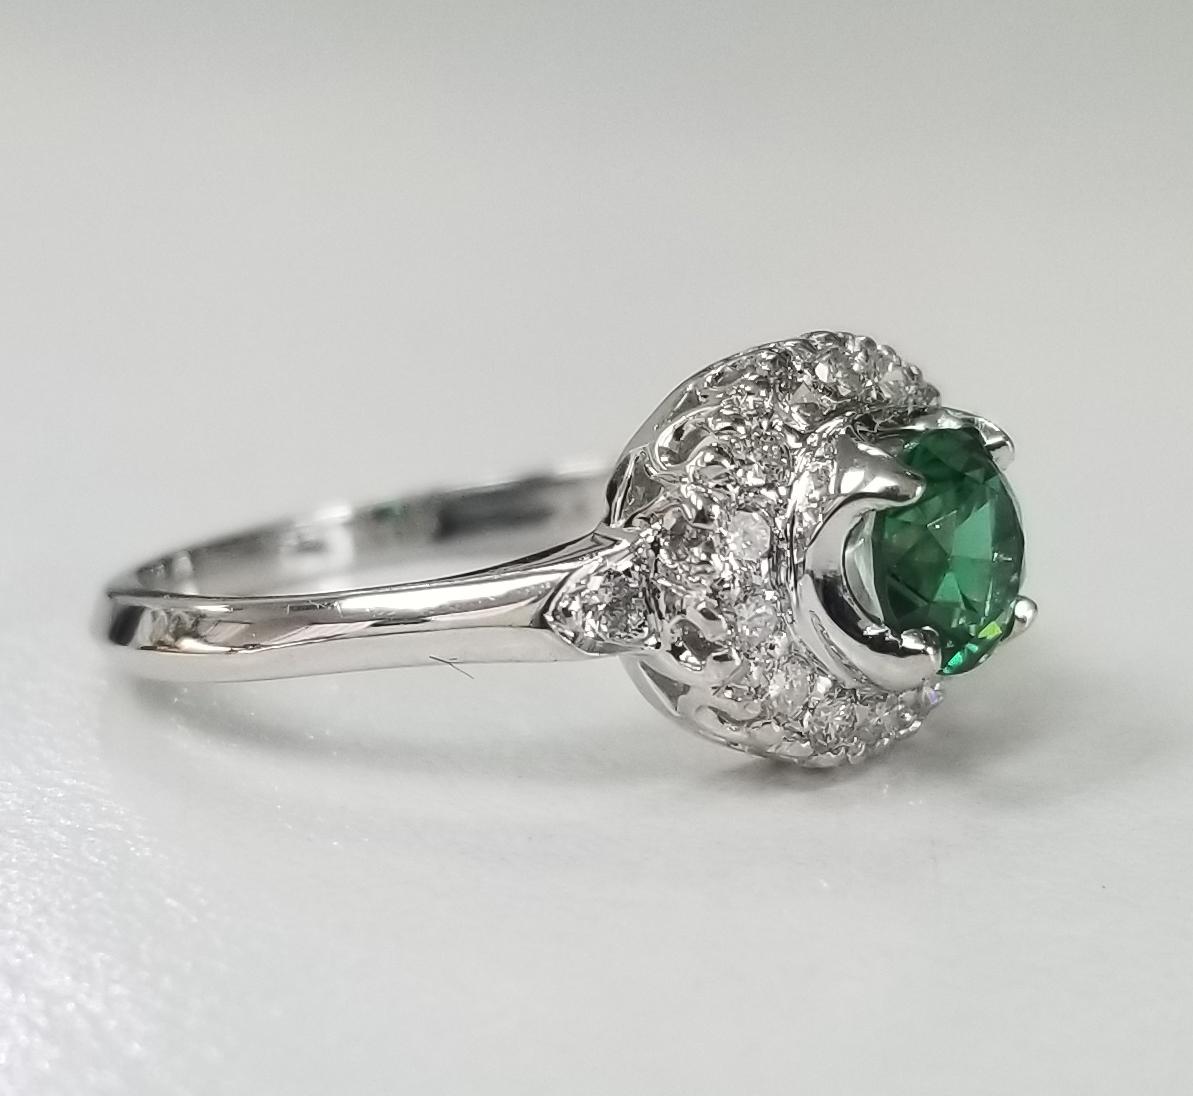 14k white gold tsavorite and diamond halo ring, containing 1 round cut  tsavorite weighing .50pts. and 16 round full cut diamonds of very fine quality weighing .25pts.  This ring is a size 5.5 but we will size to fit for free.

Tsavorite is a trade